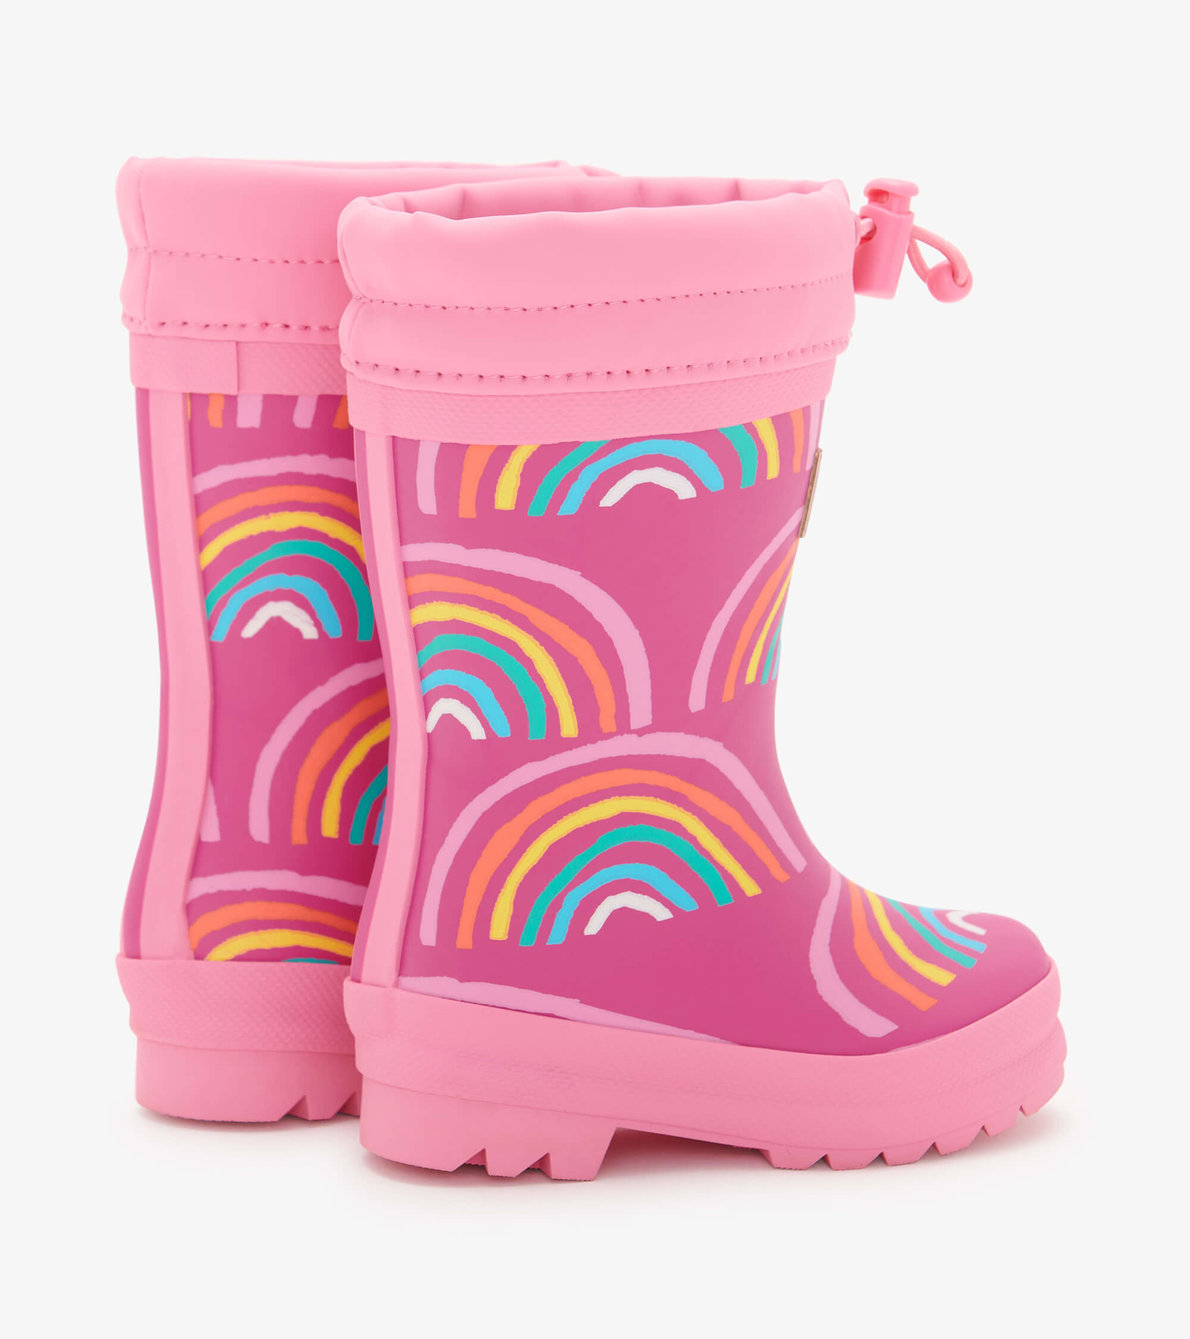 View larger image of Rainy Rainbows Sherpa Lined Baby Wellies